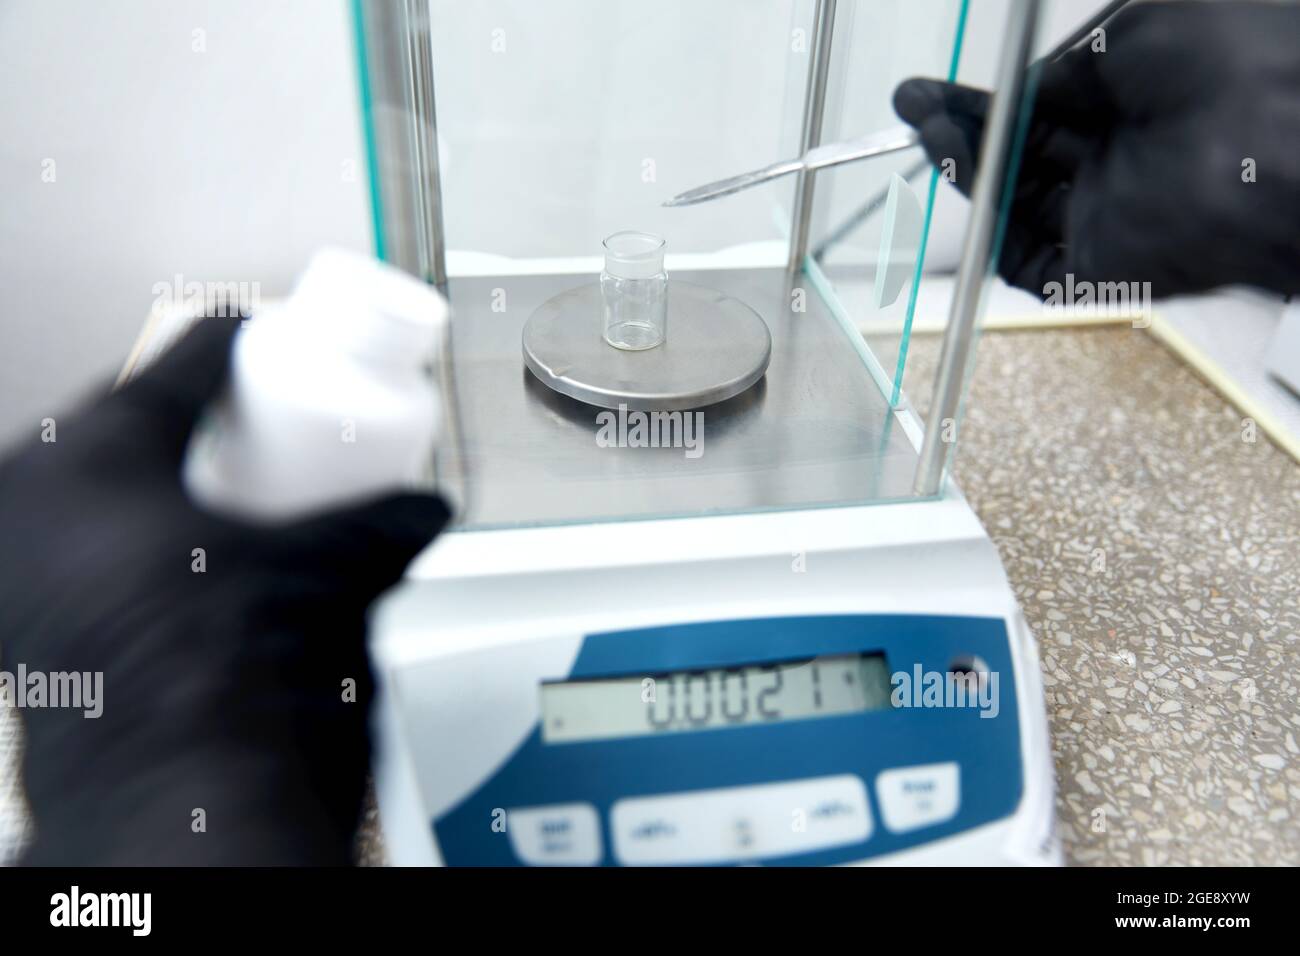 Scientist weighing chemicals by digital scales in grams in chemical laboratory Stock Photo